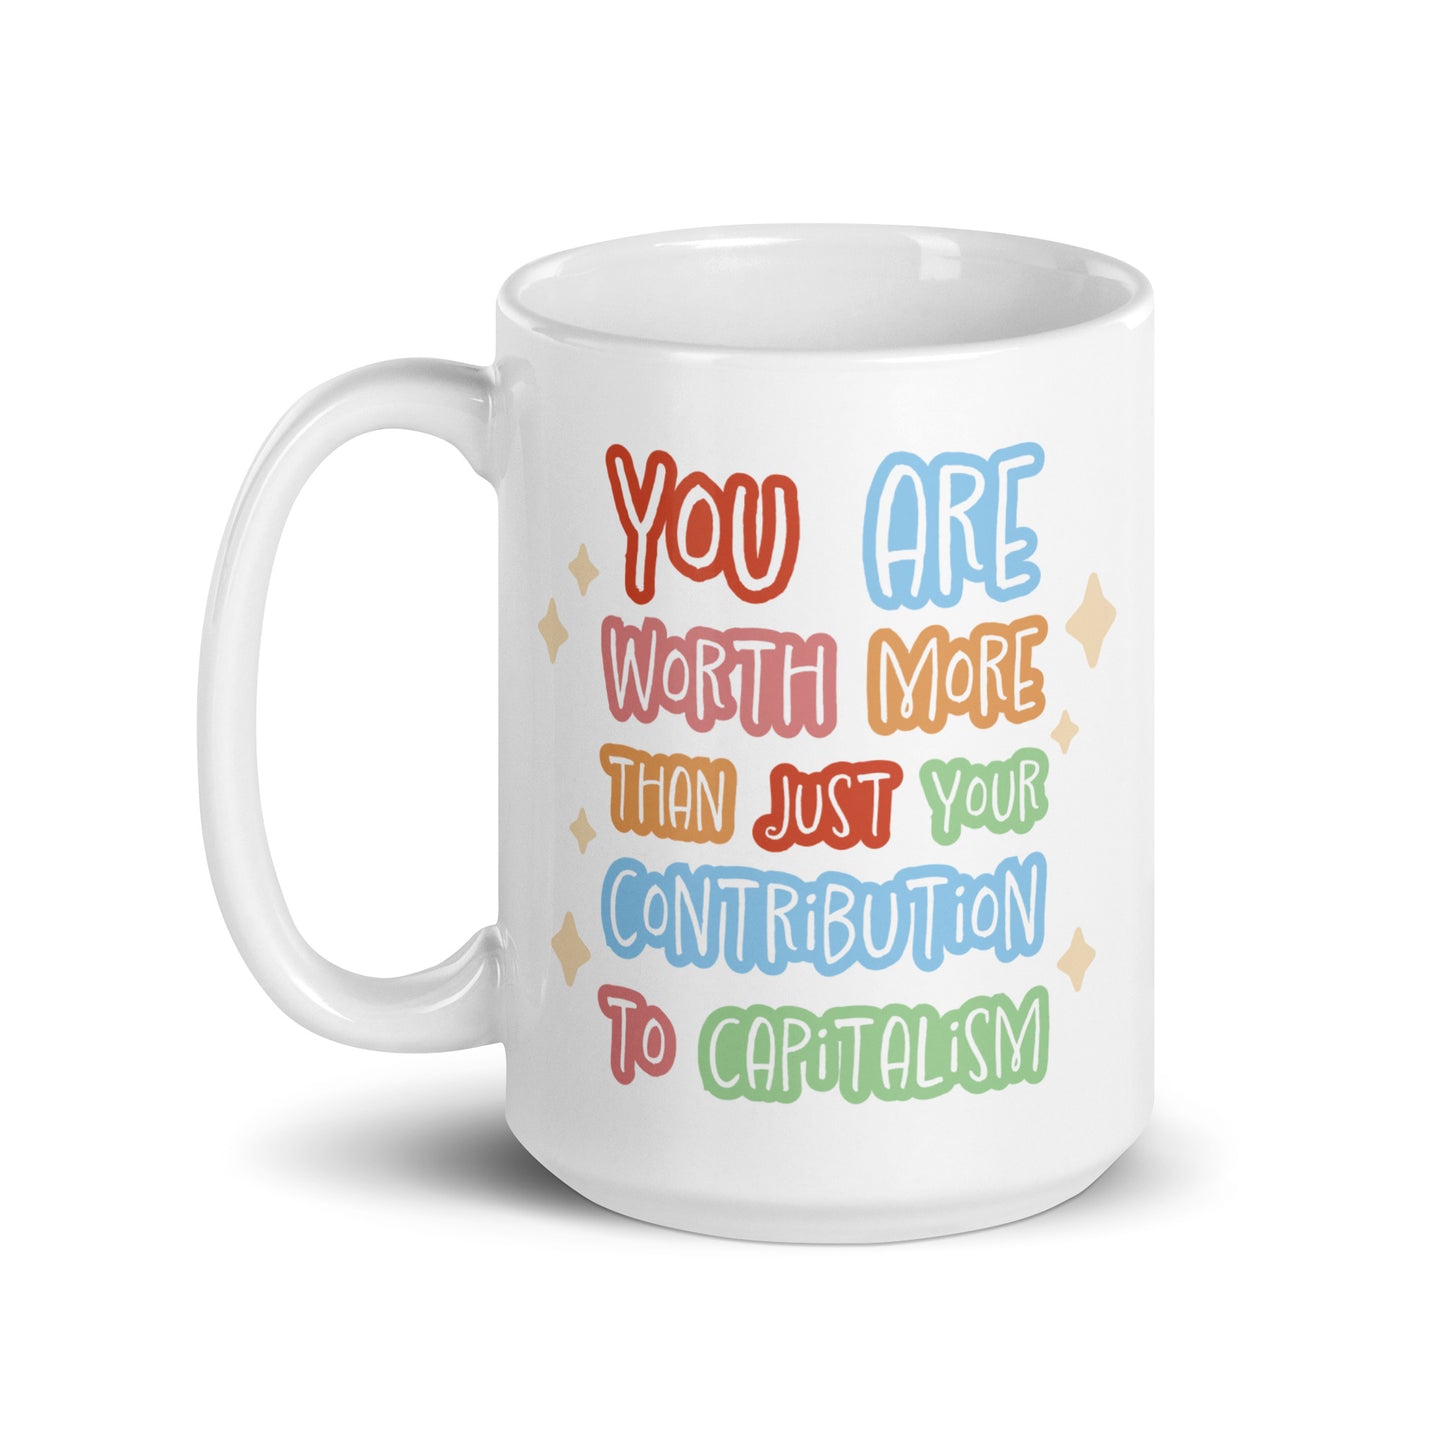 A white ceramic 15 ounce mug featuring colorful hand-written-style text that reads "You are worth more than just your contribution to capitalism". Sparkles surround the text on each side.